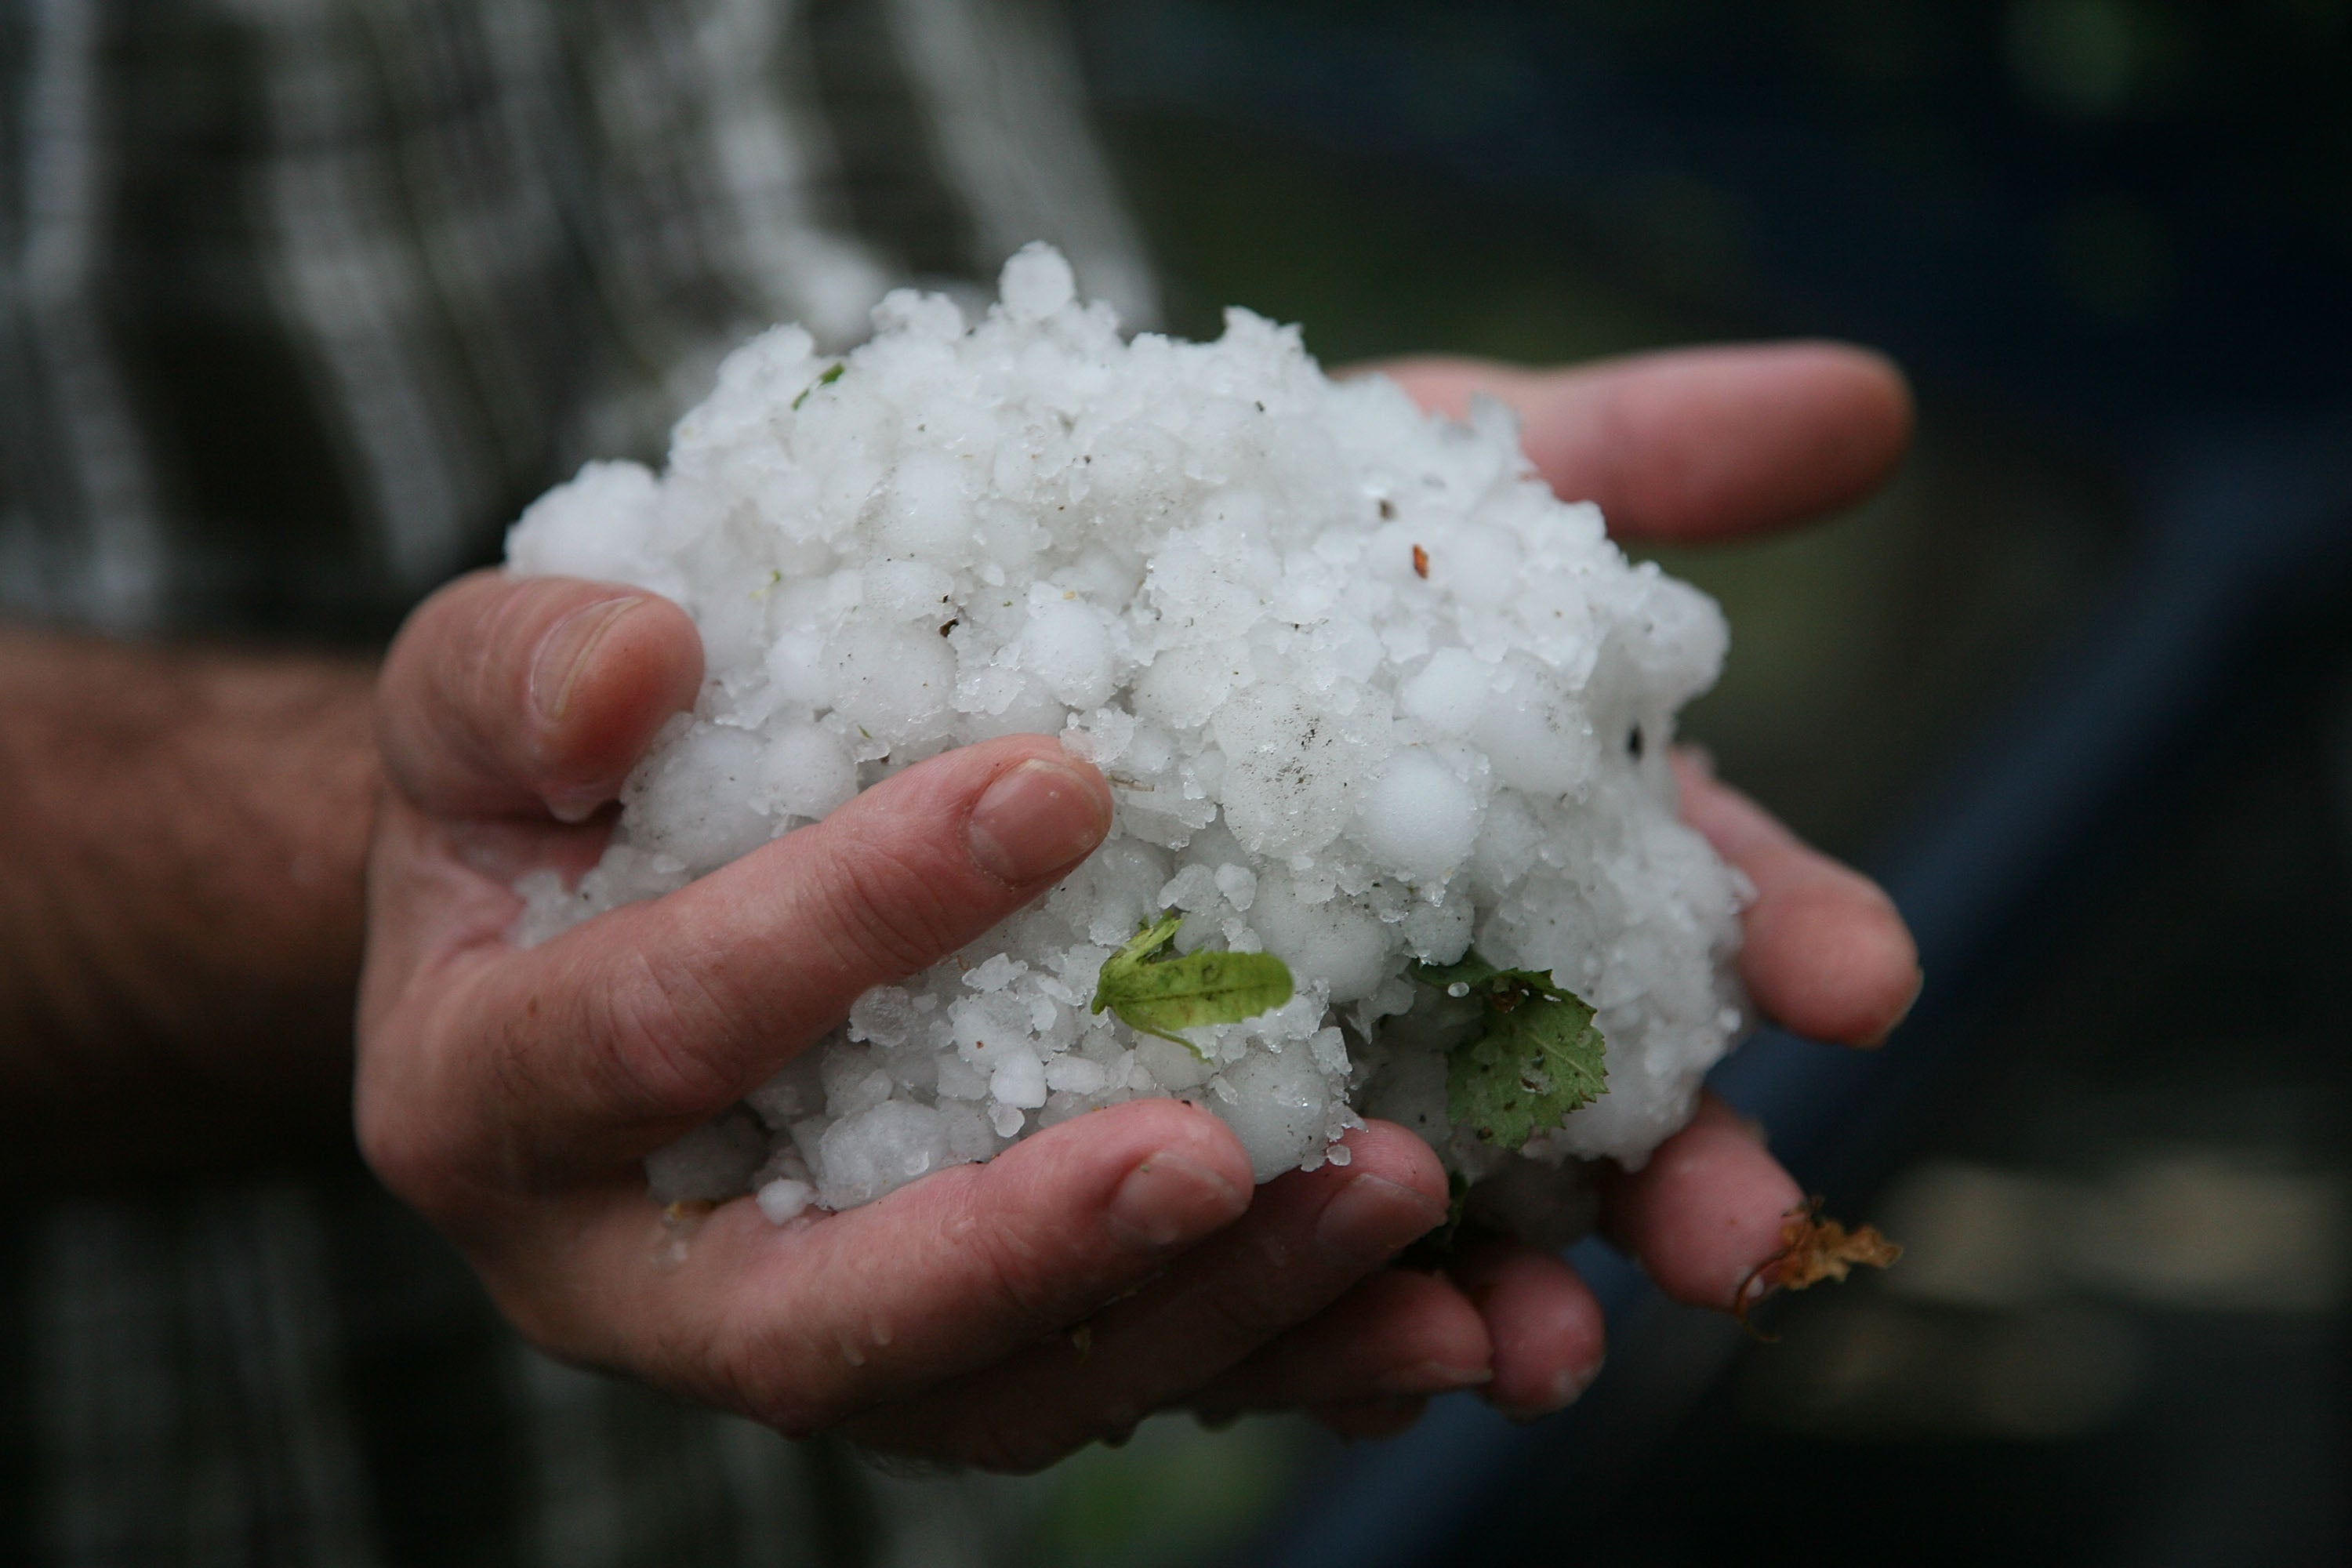 Representational image: Residents found hailstones the size of baseballs as they warned others in the area to be careful